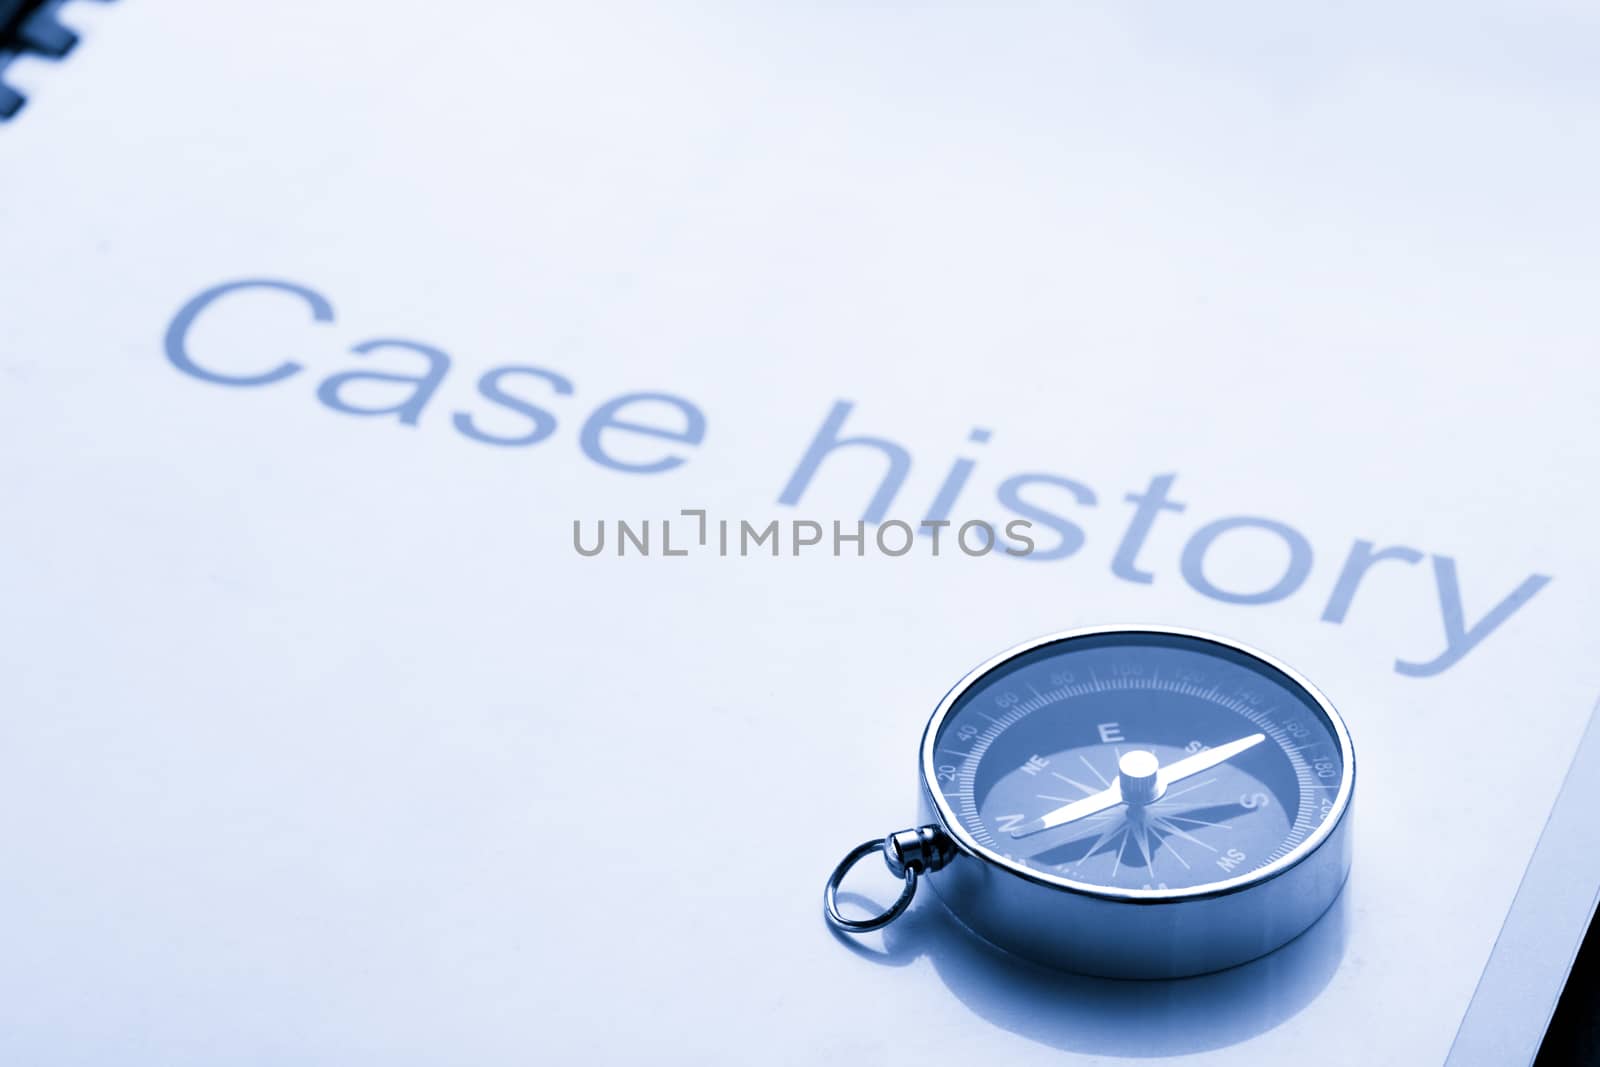 Case history and compass on black